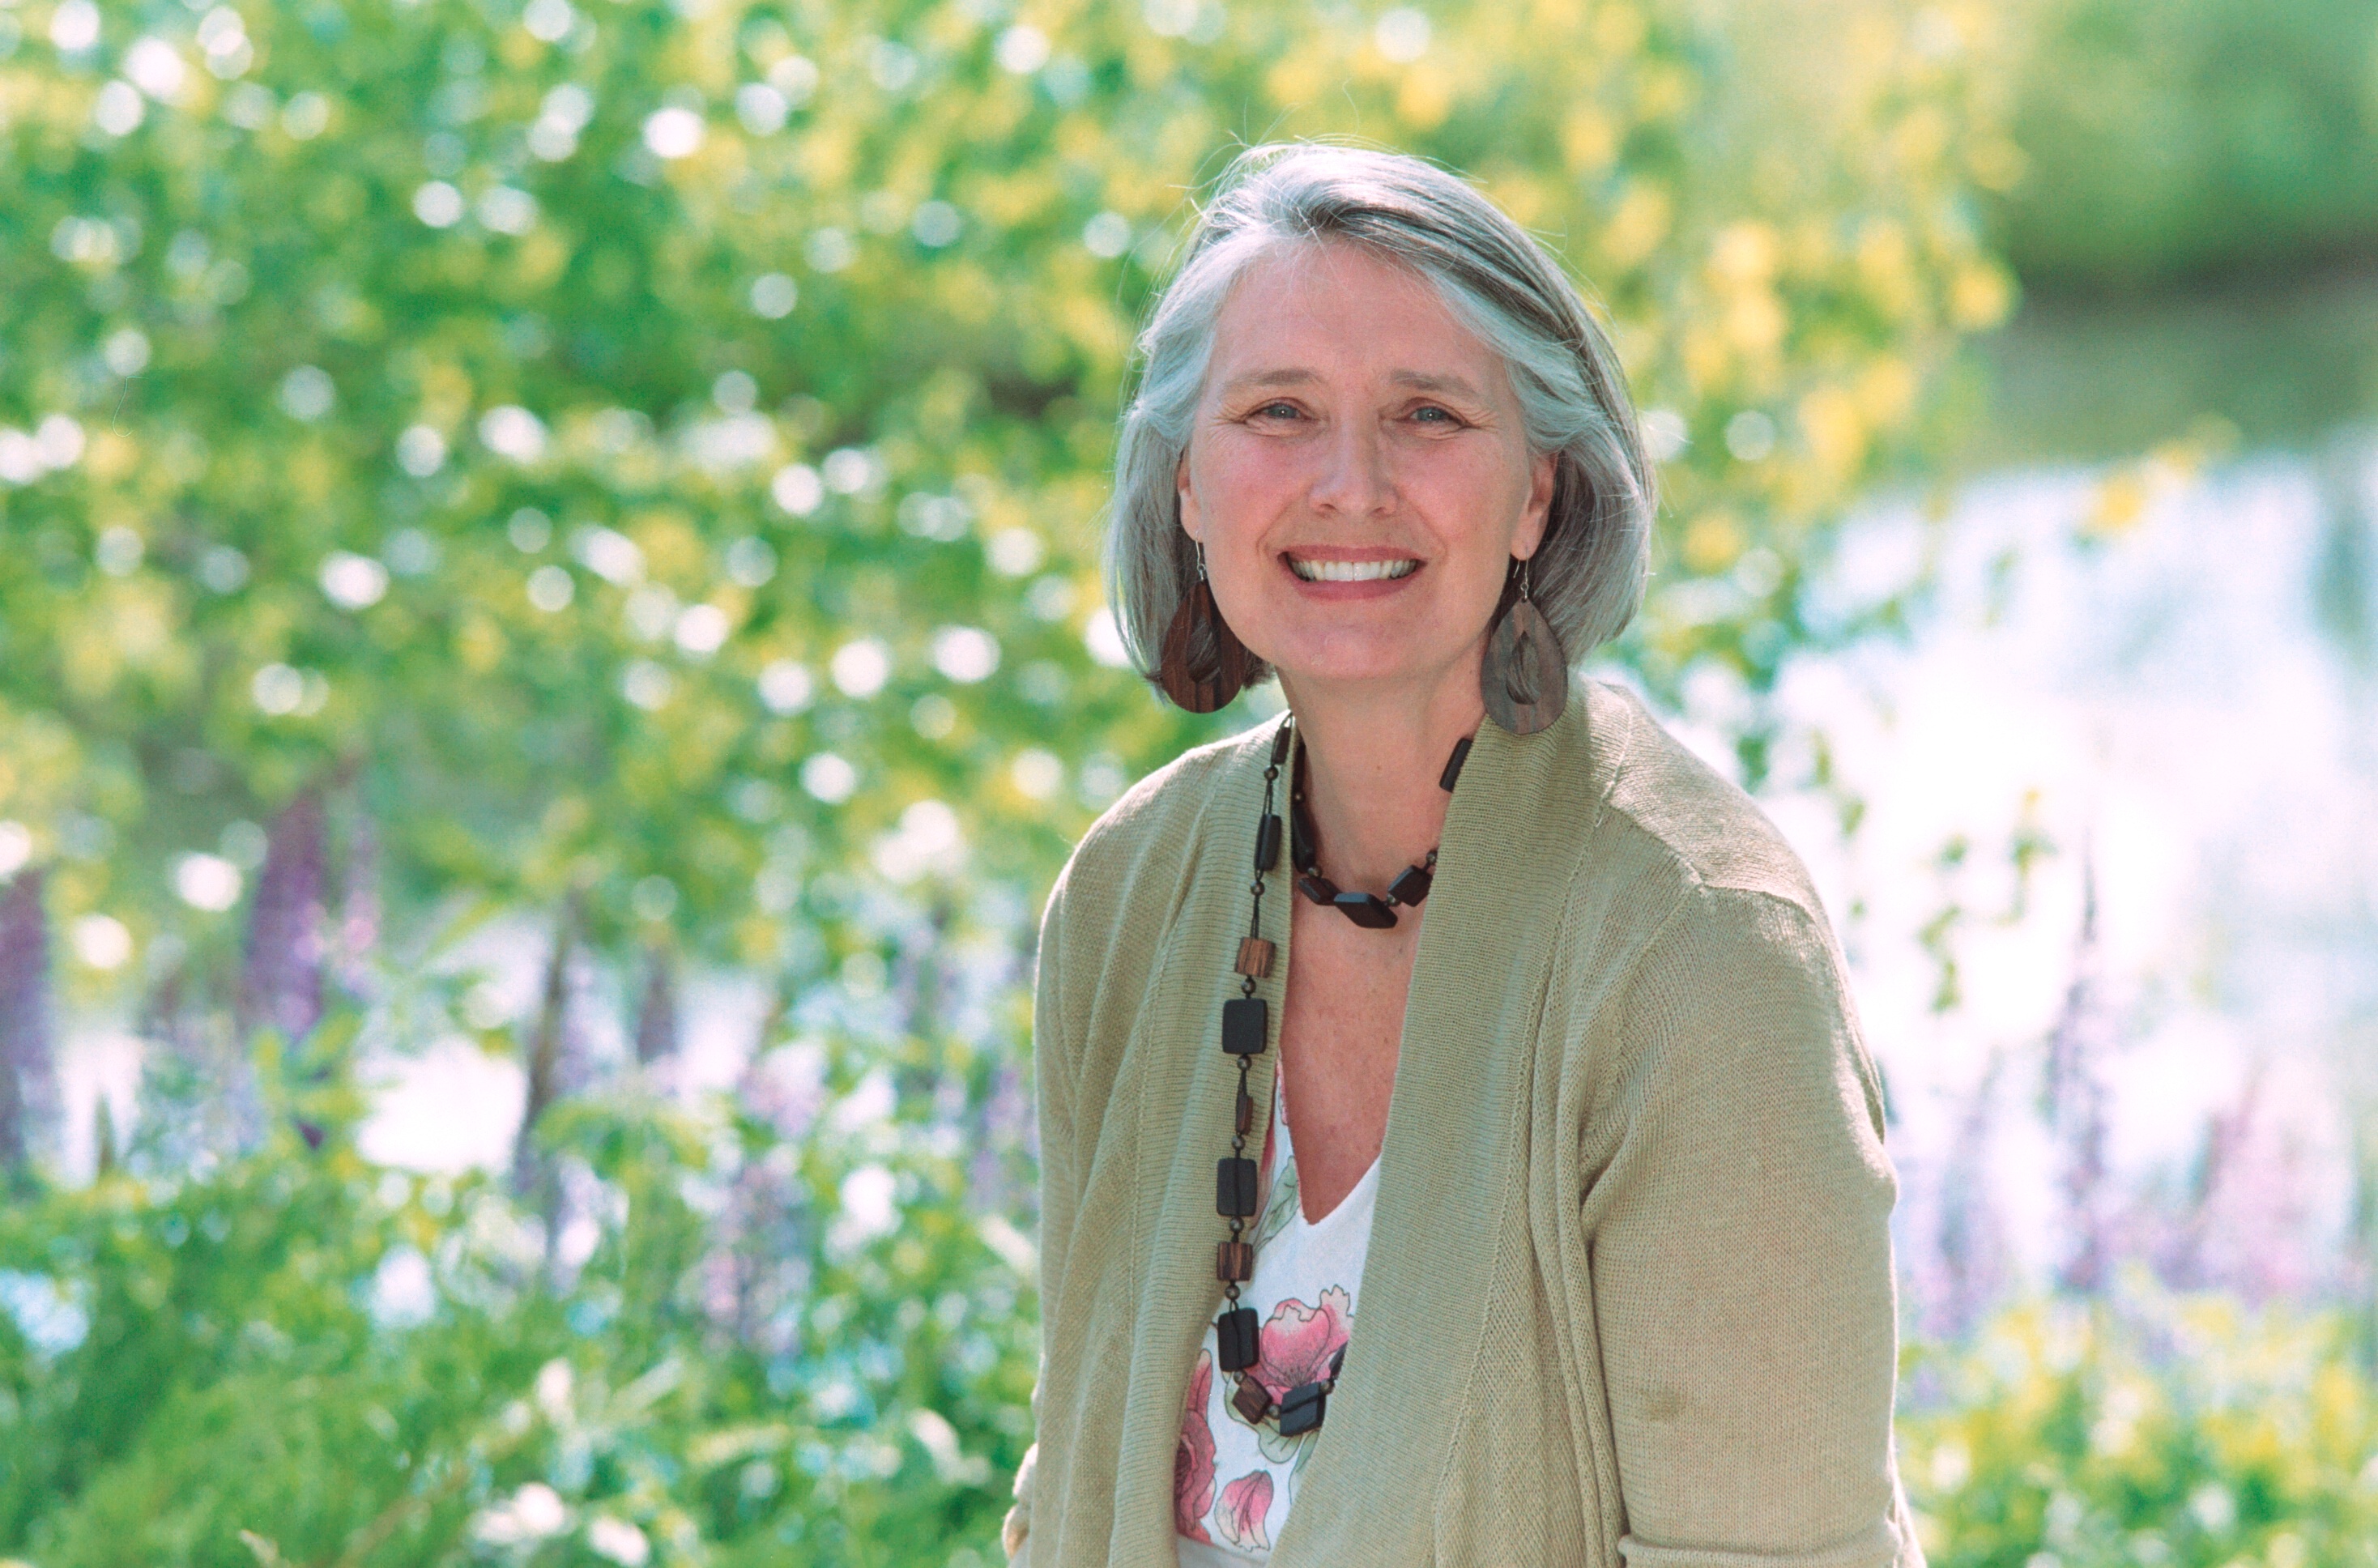 Louise Penny is the author of ten mystery novels featuring the character of Chief Inspector Armand Gamache. The books are set in Quebec's Eastern Townships region.